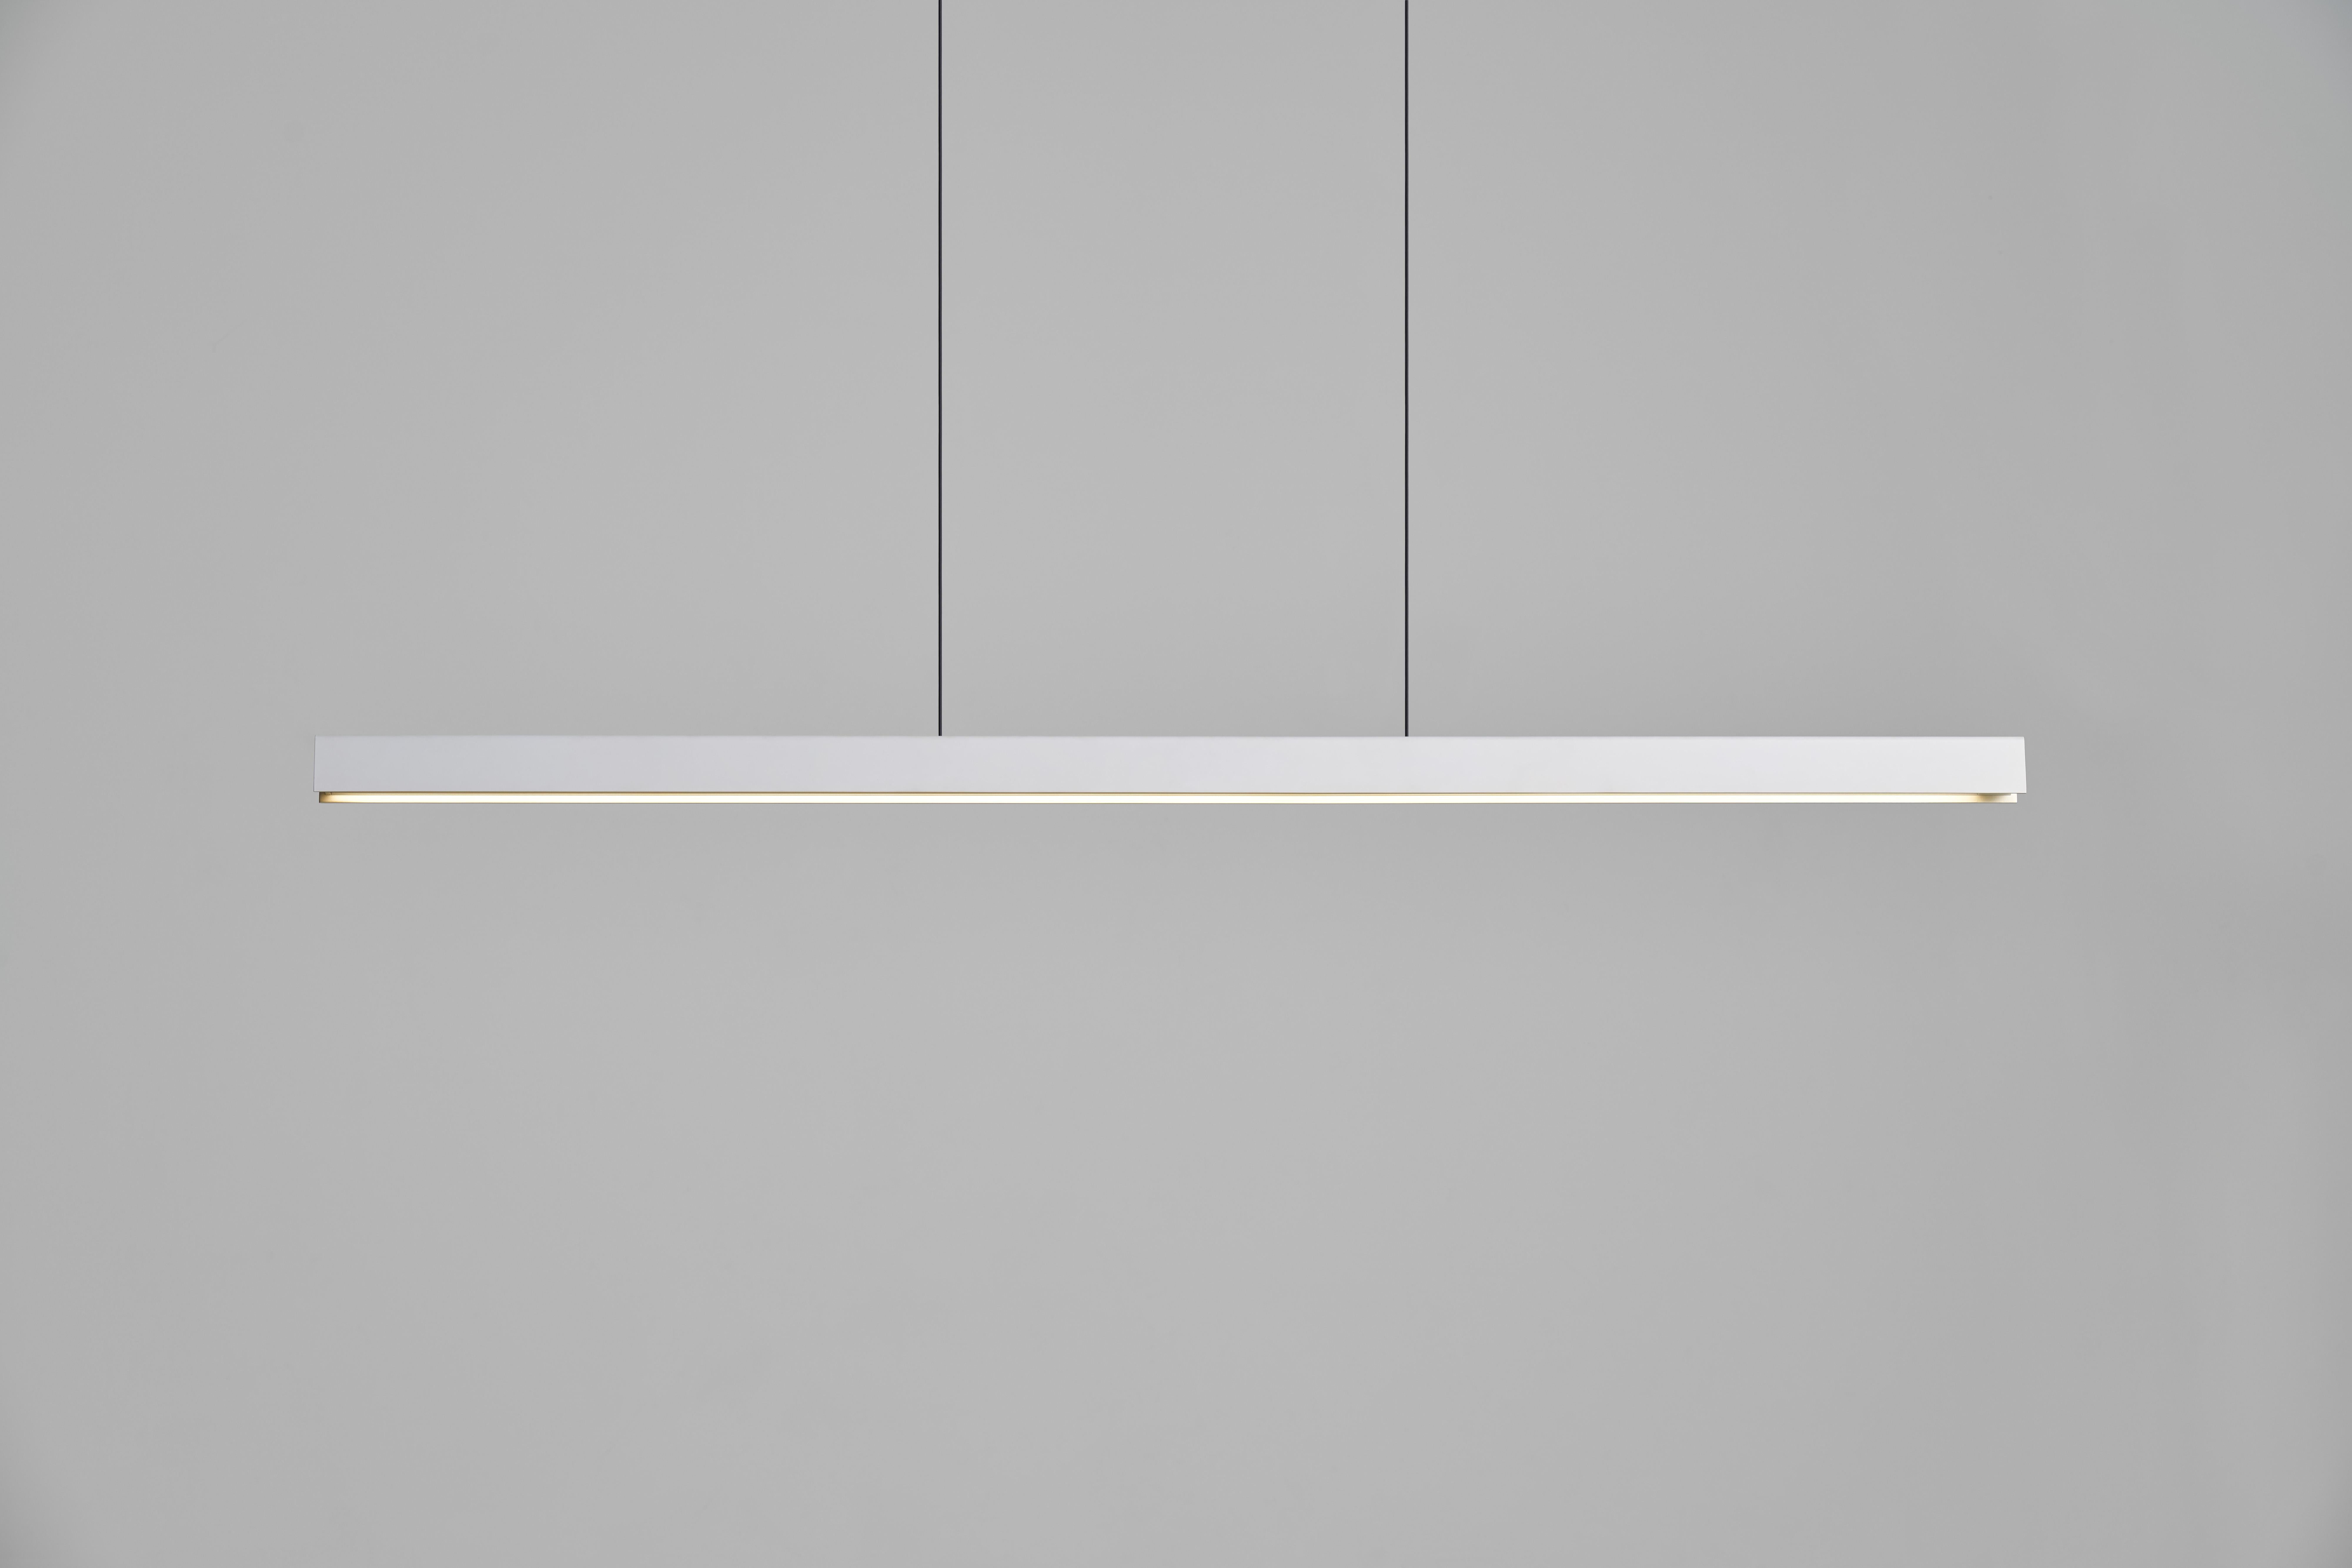 The Square pendant is simplistic yet sophisticated in both function and design. The exterior is available in Black or White, while the inner surface is finely coated in Brushed Gold. The lamp is can be controlled by touchless sensors located on one